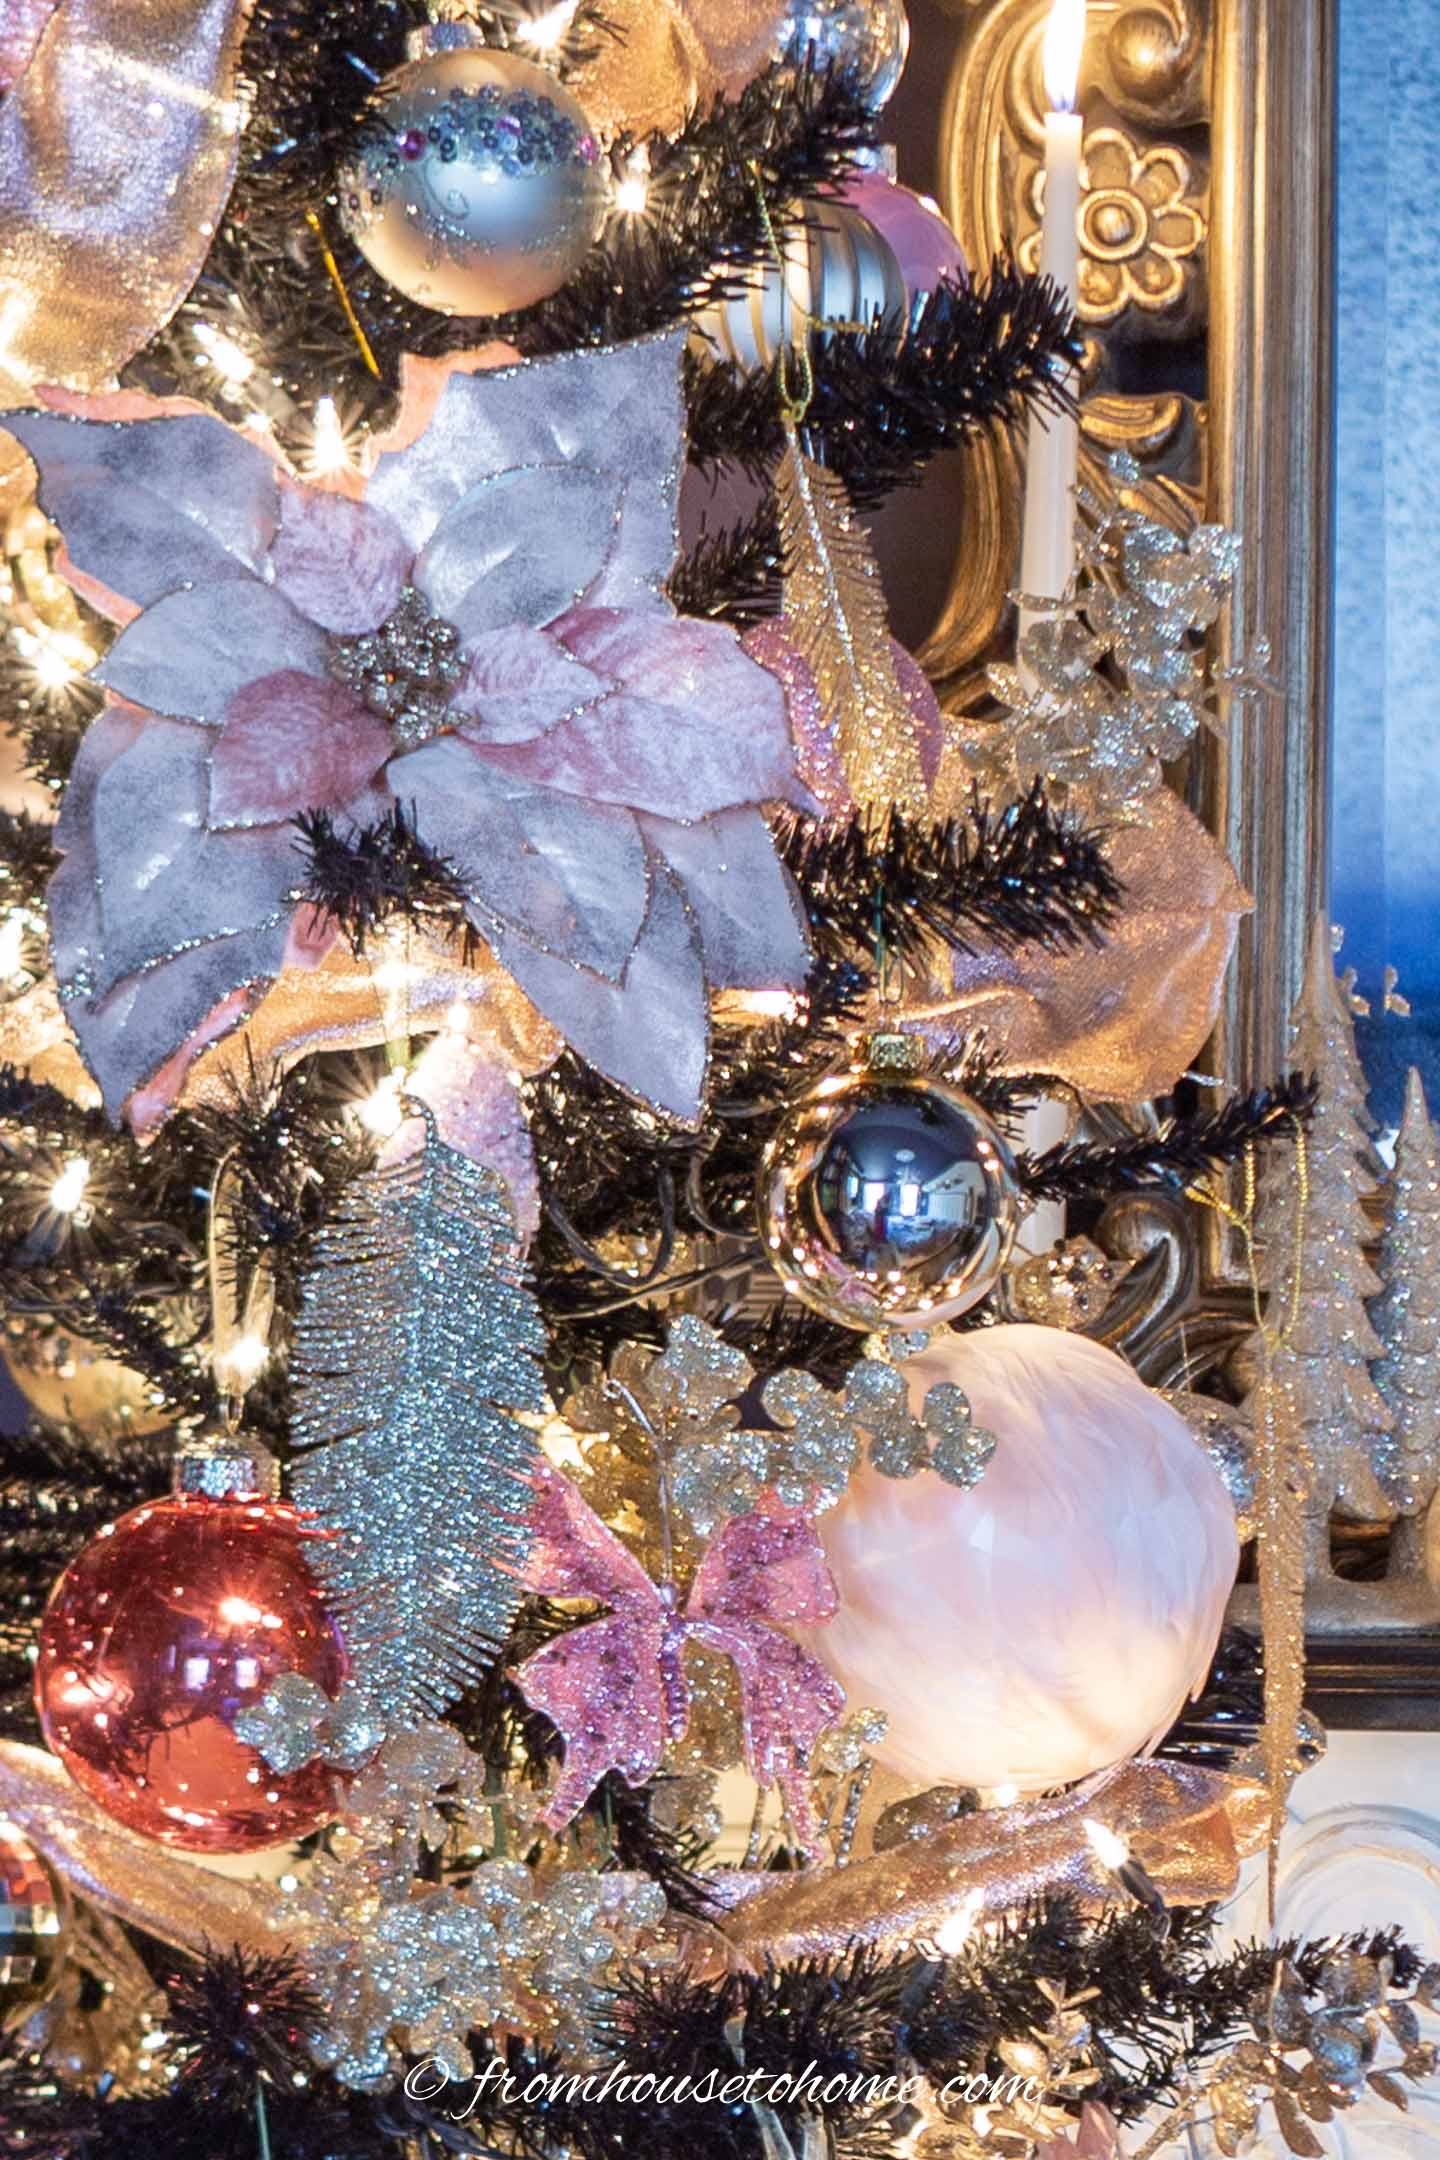 Black Christmas tree with pink poinsettia pick and feather-covered pink ornament